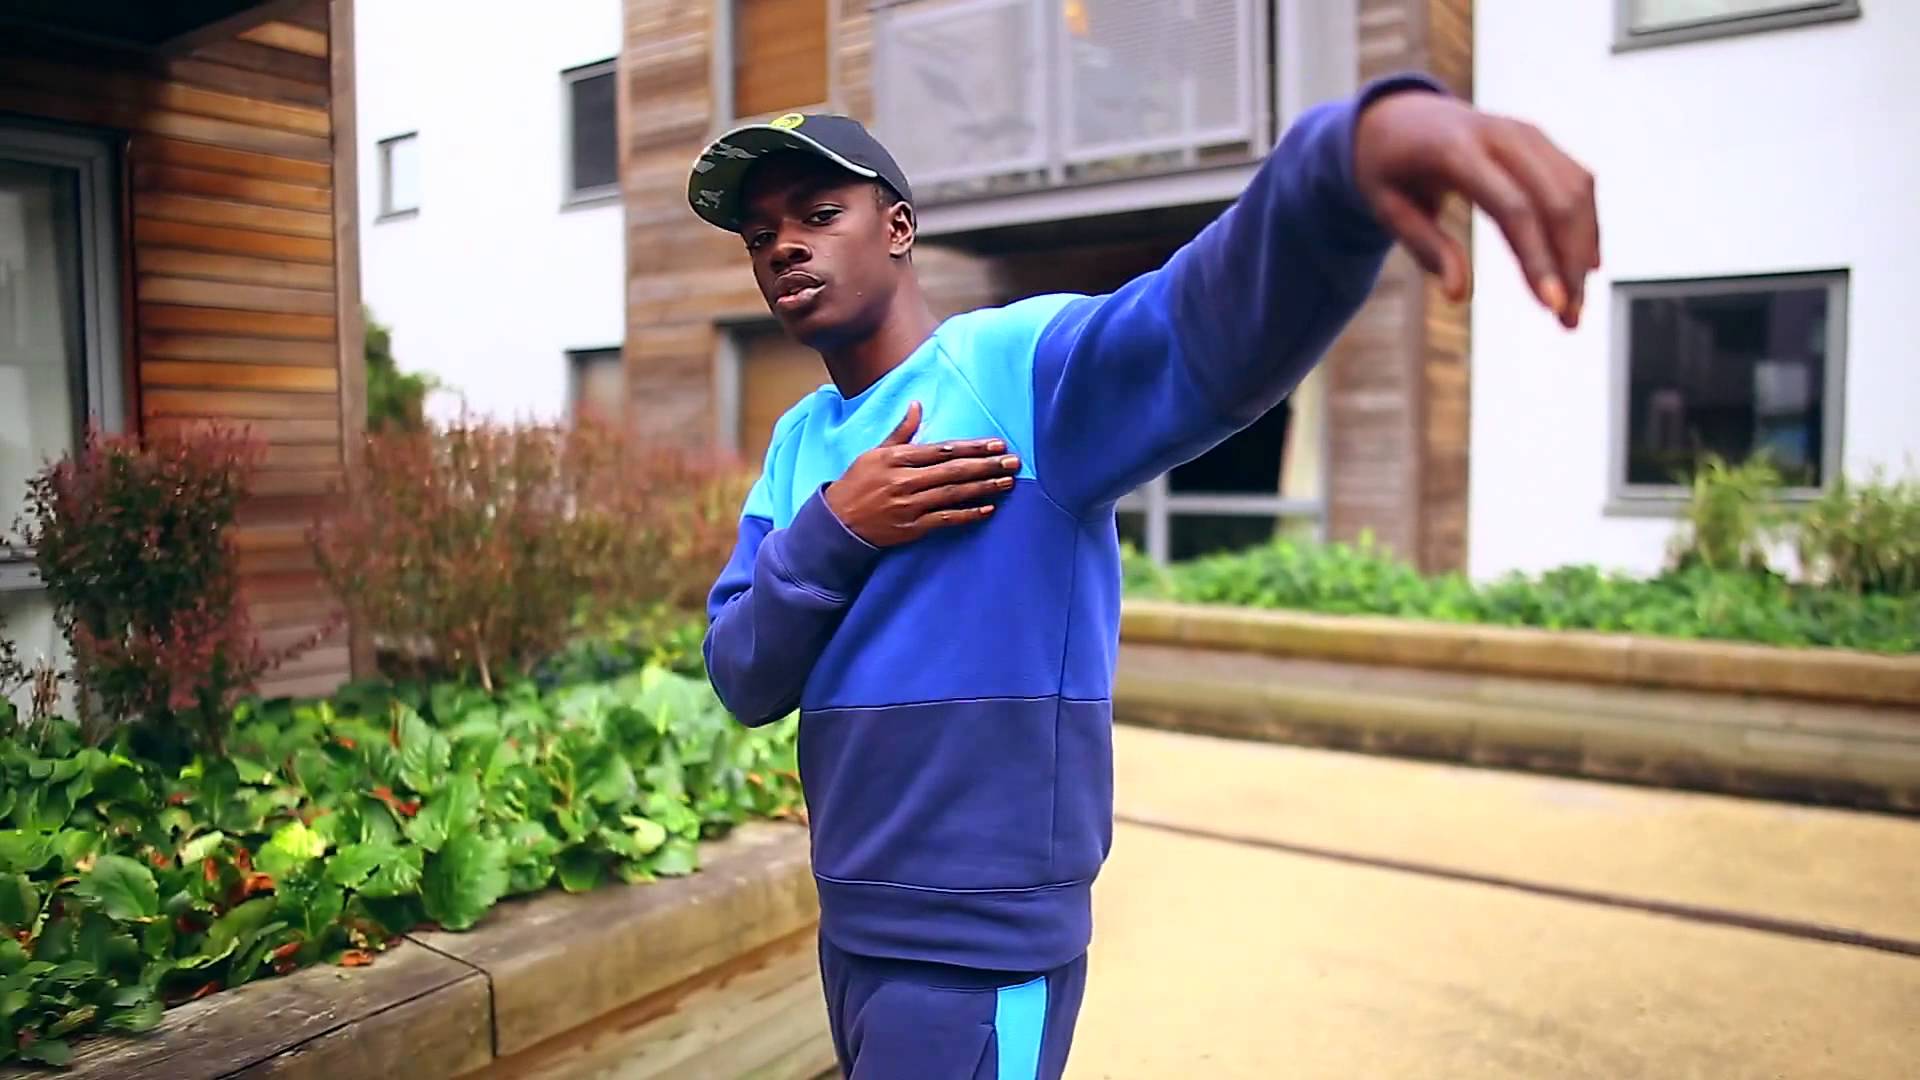 Lewisham-born rapper Reeko Squeeze returns with a beat produced by SV